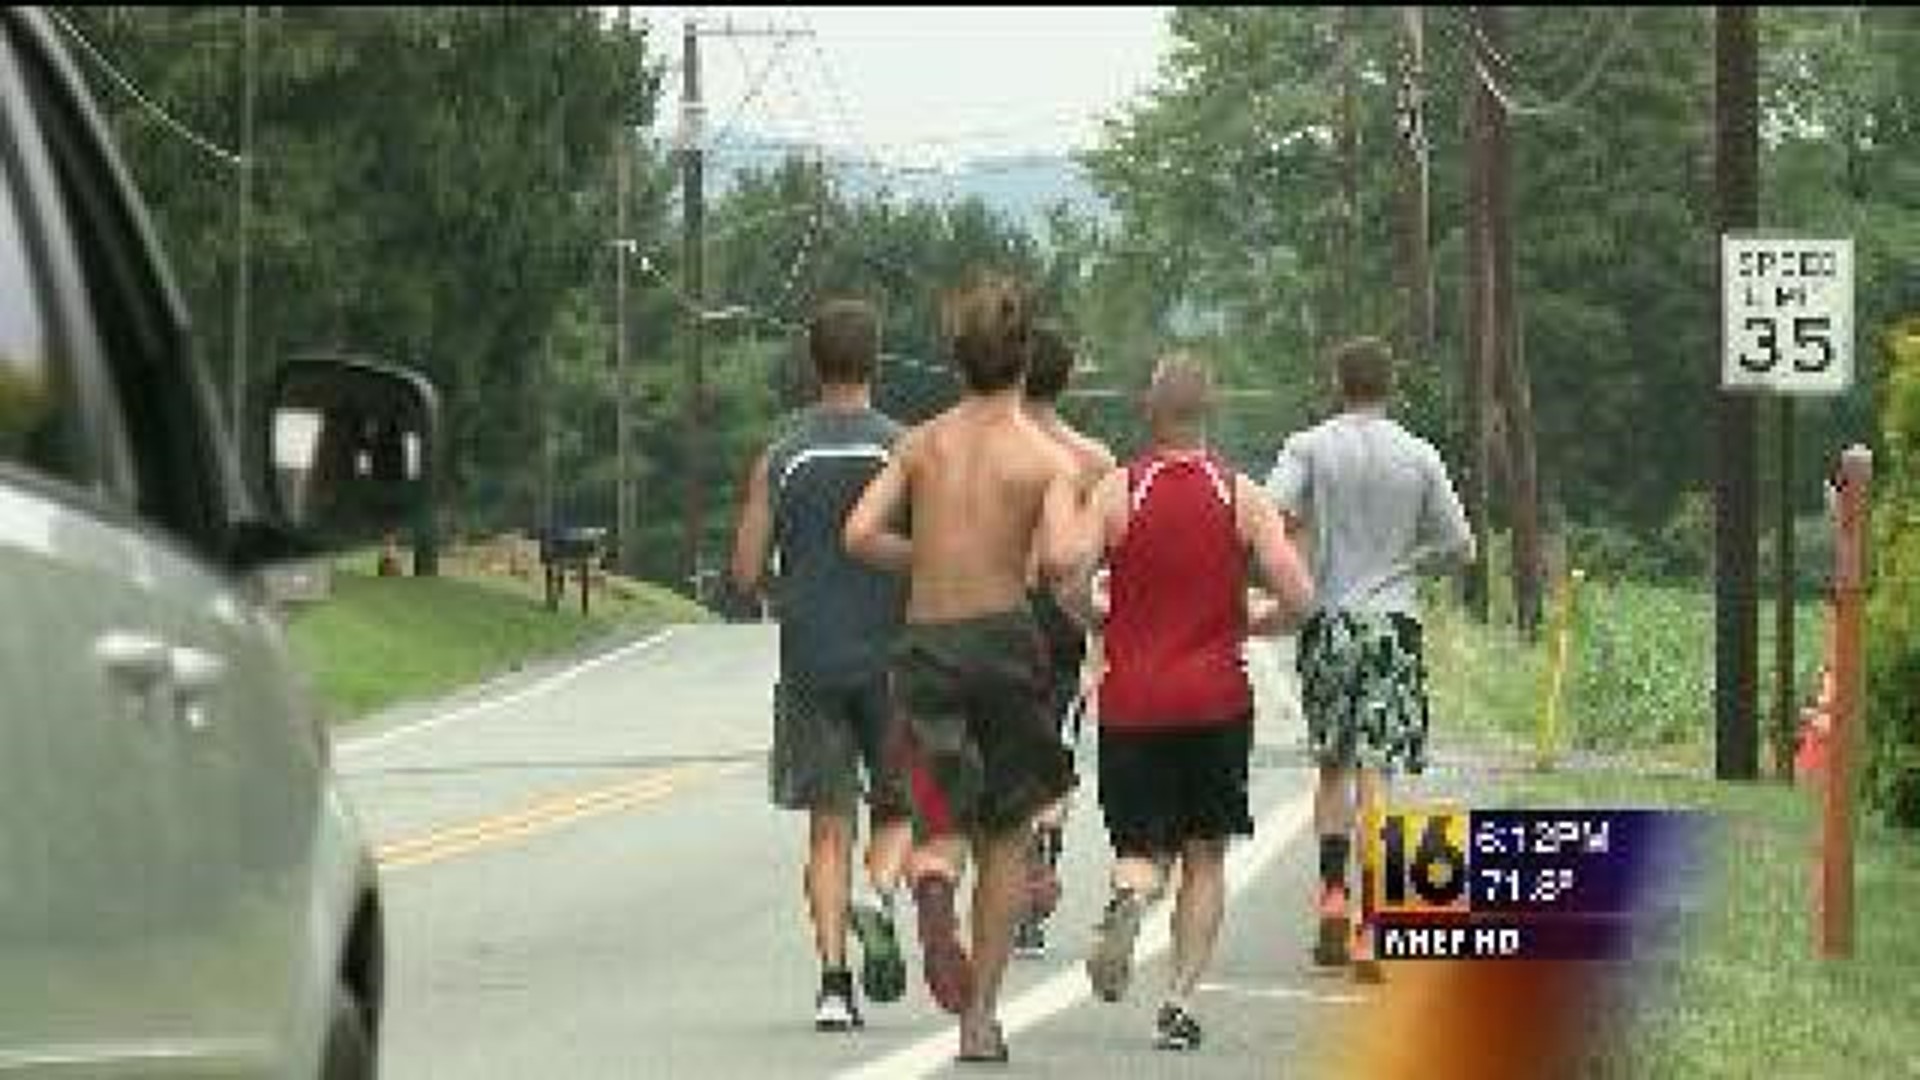 Another 23 Mile Run Benefits Wounded Warriors